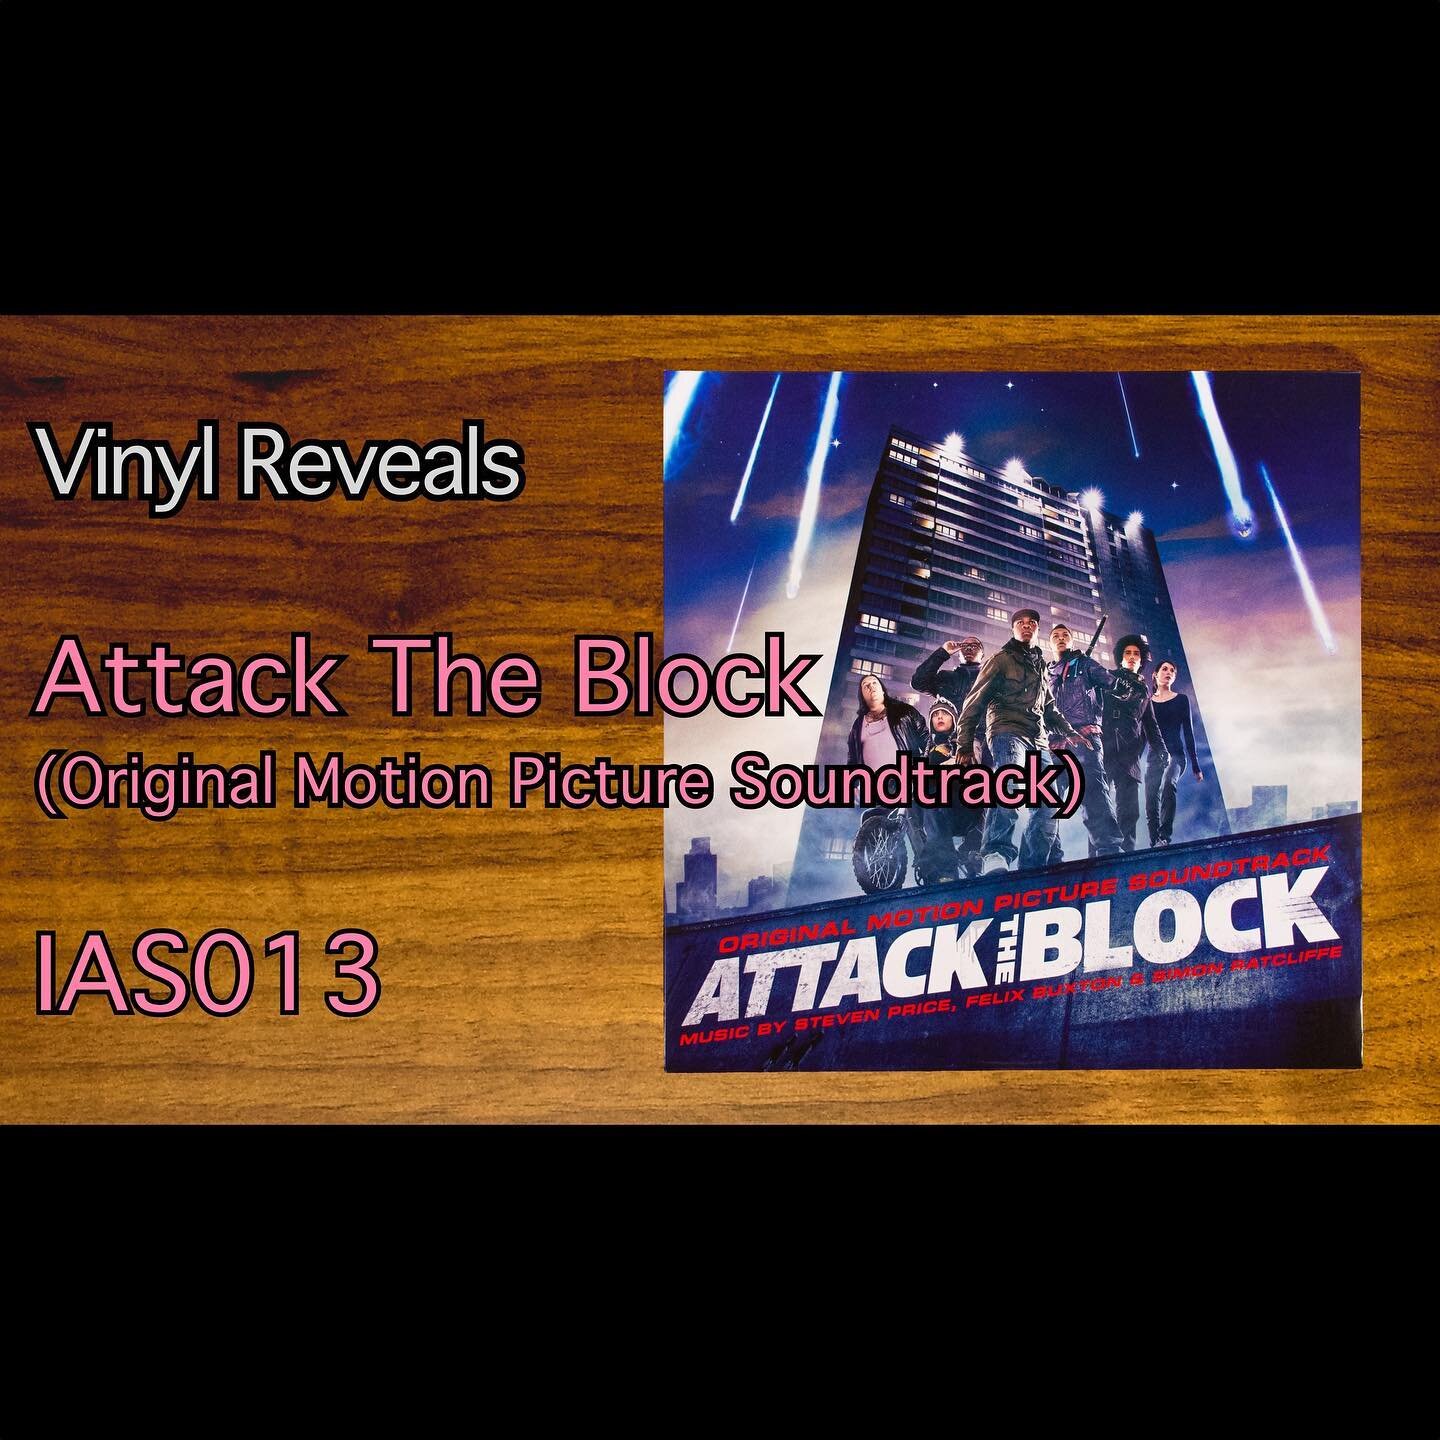 Today we are looking at the Attack The Block (Original Motion Picture Soundtrack). Video is now live on the Vinyl Reveals YouTube channel. Link in profile.

#vinylReveal #vinyl #vinylcollection #vinylrecords #records #vinylReveals #vinylcommunity #mo